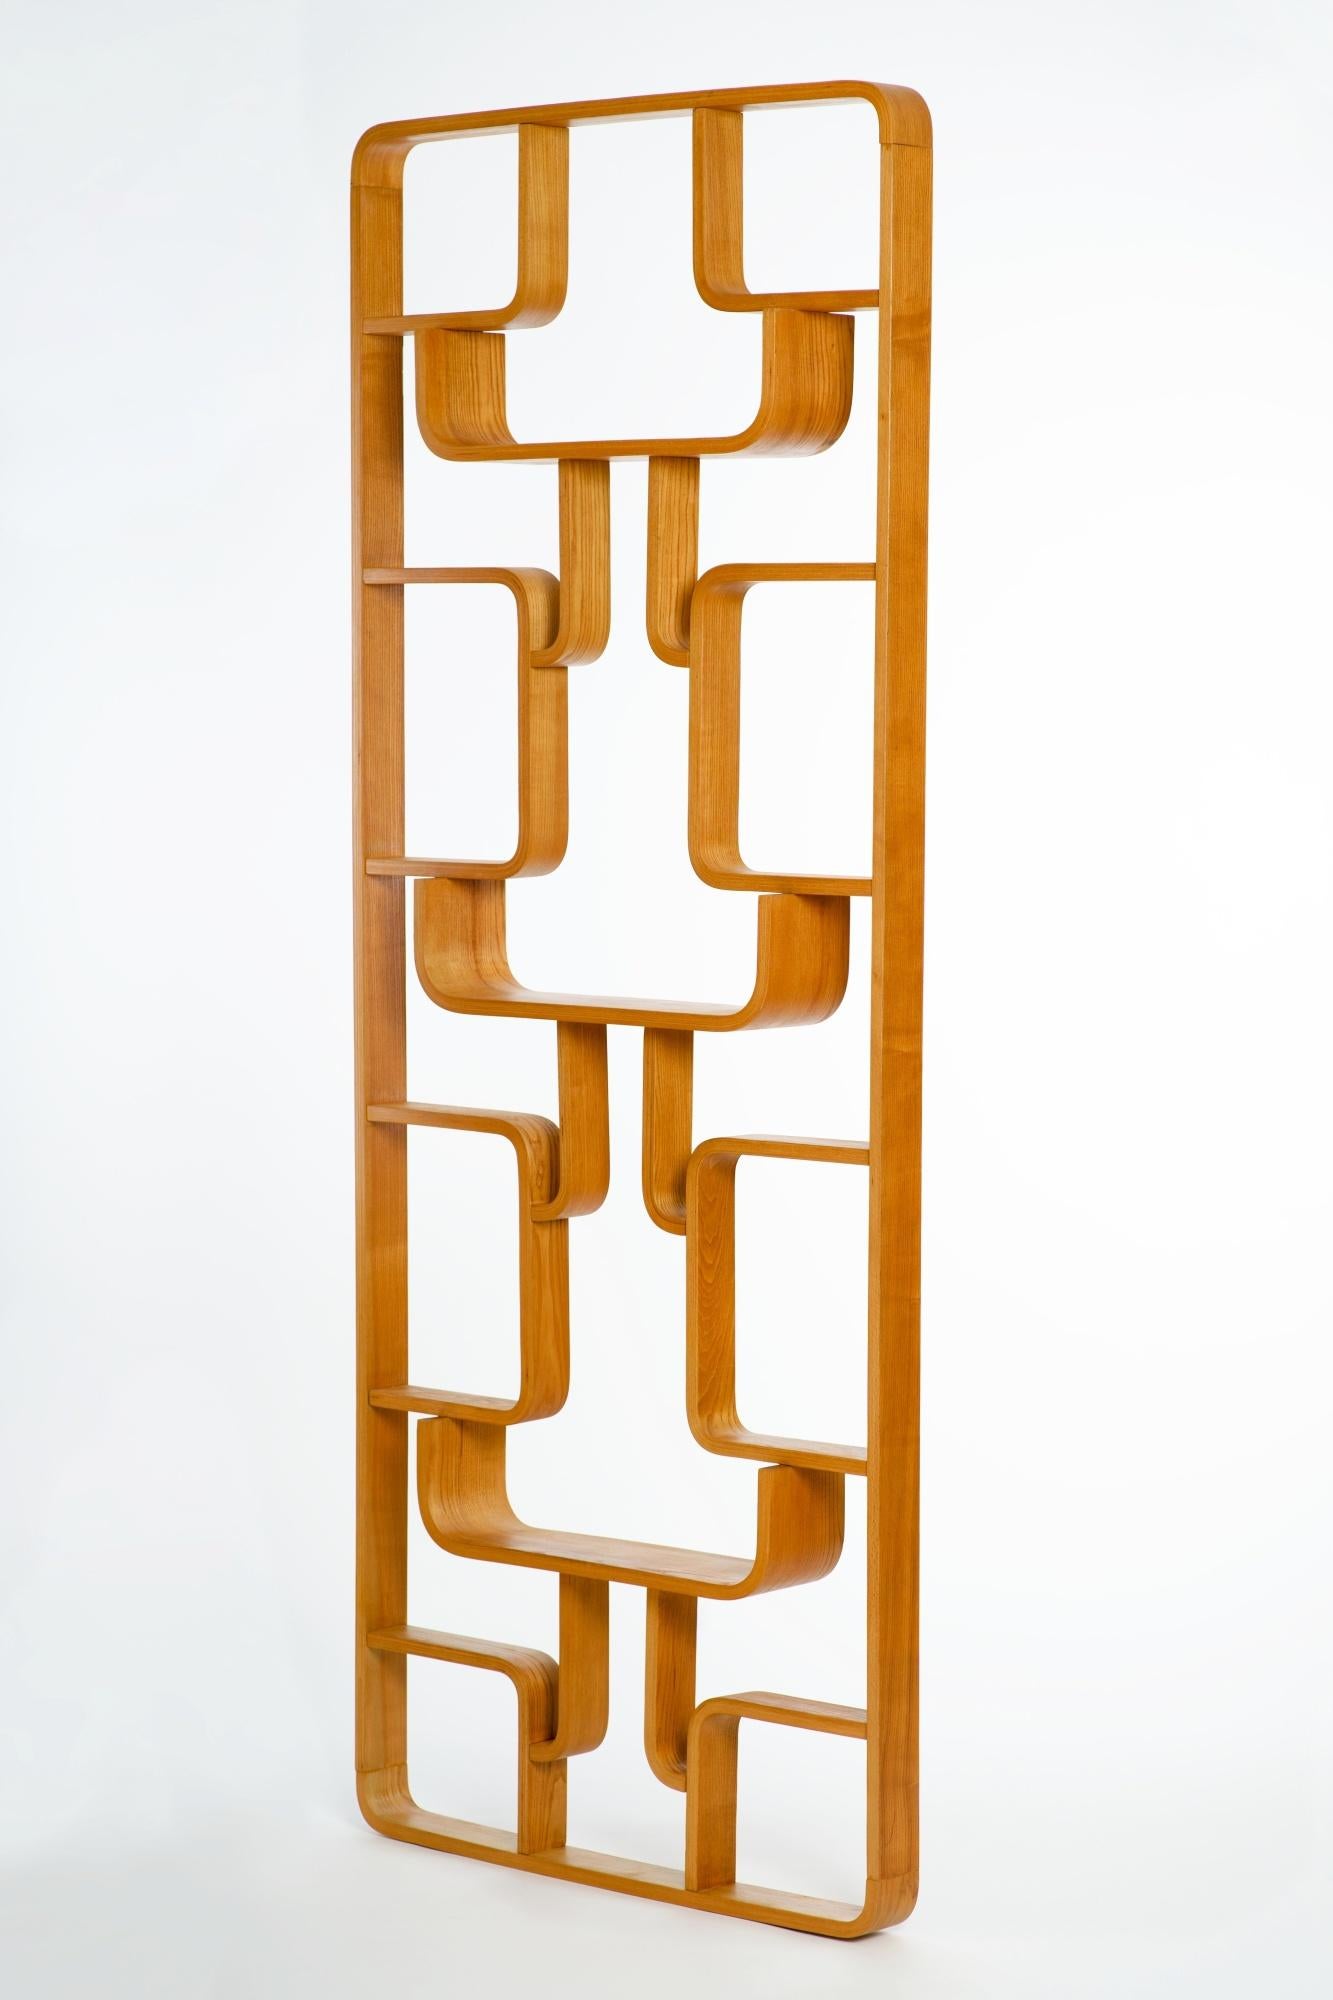 This room divider from the 1960s was designed by Ludvik Volak for Drevopodnik Holesov, in Czechoslovakia. This is made of bent beech plywood and ash veneer and with original label. Completely restored. Excellent condition. Shipping with two matching